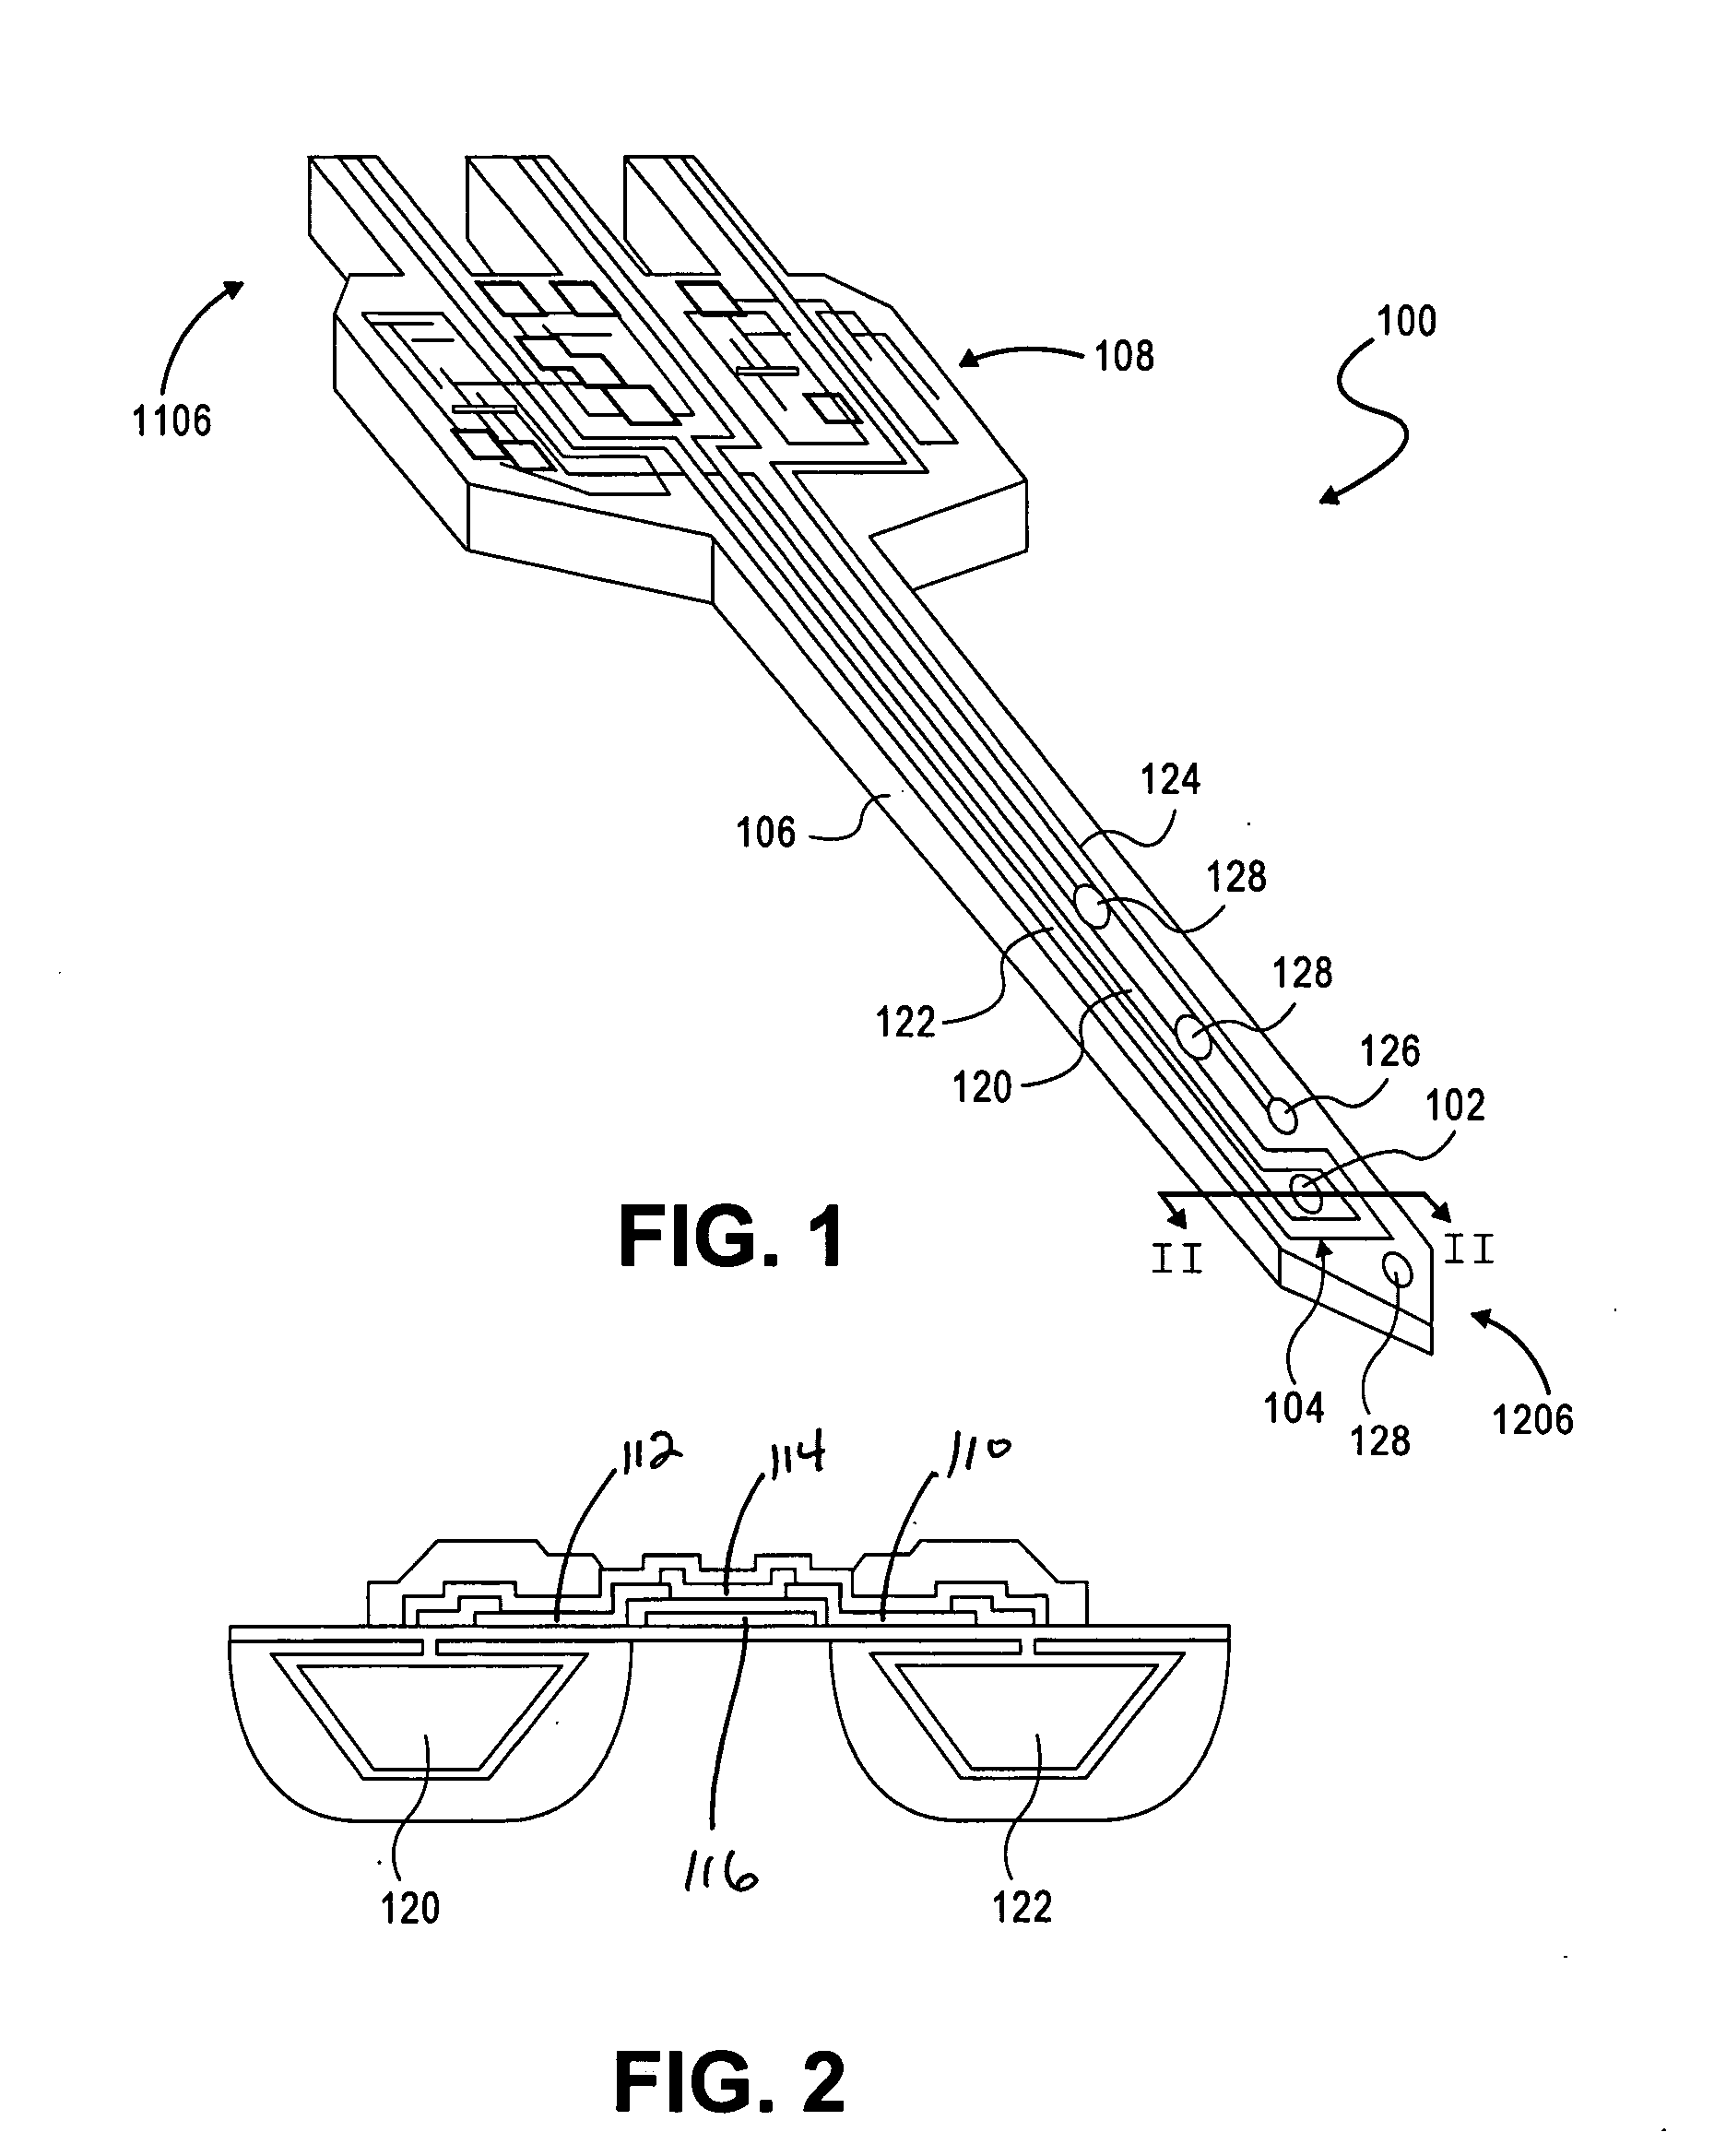 Micro-machined medical devices, methods of fabricating microdevices, and methods of medical diagnosis, imaging, stimulation, and treatment